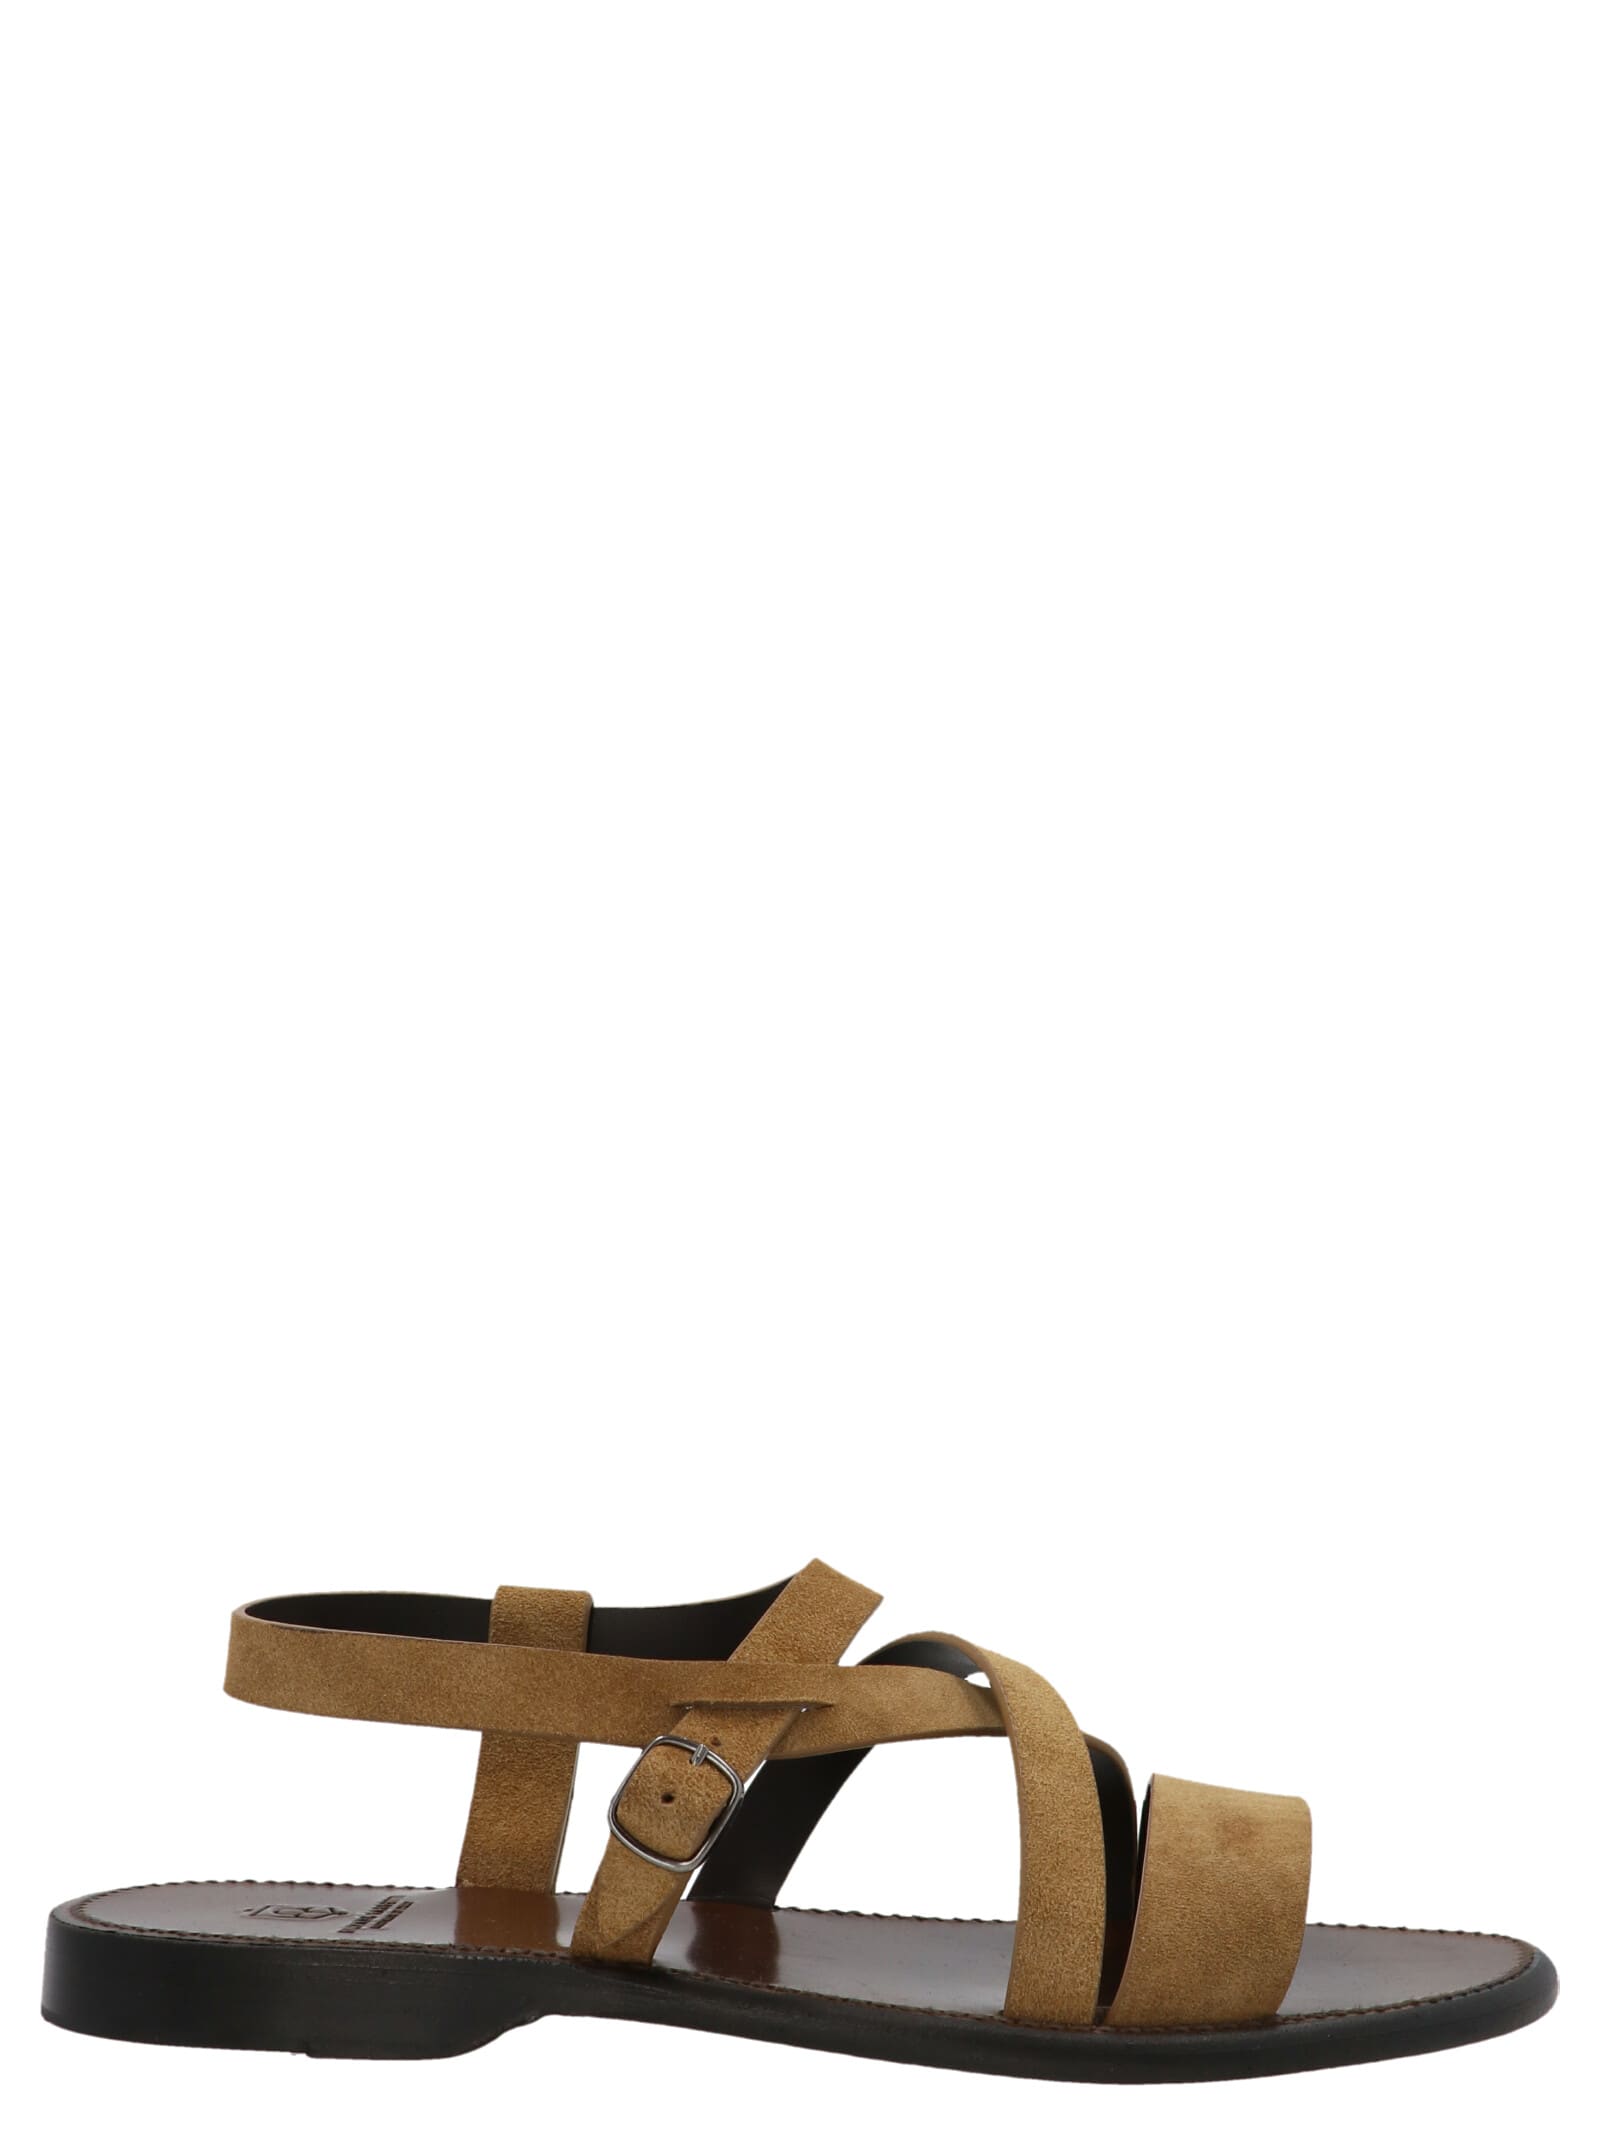 Silvano Sassetti Crossover Bands Suede Sandals